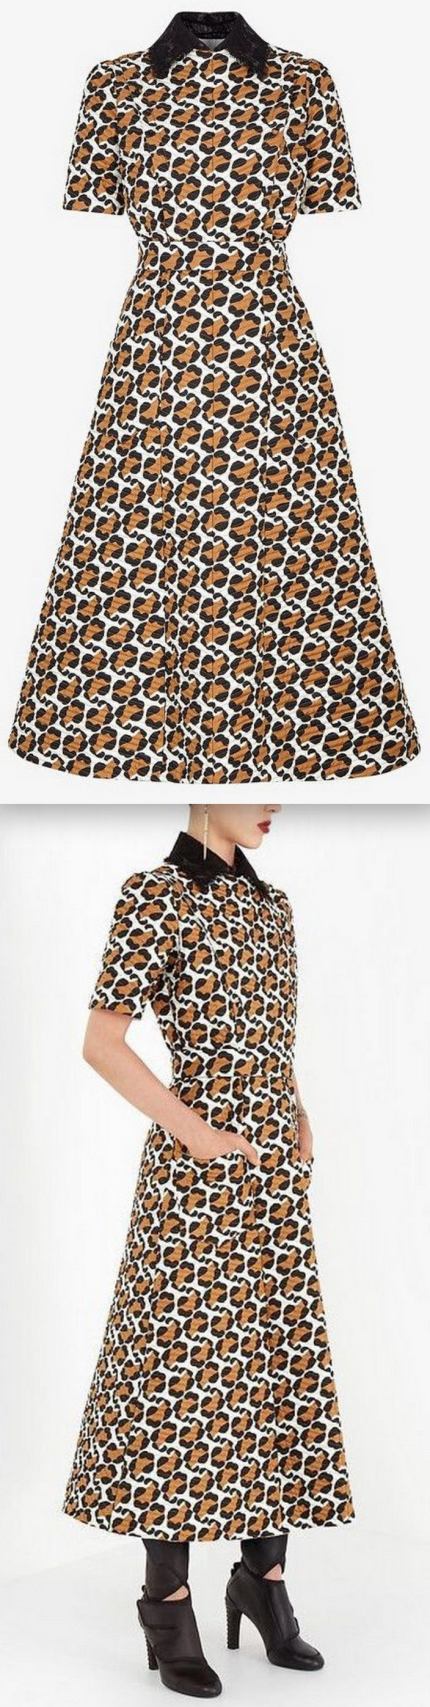 A-Line Animalier Motif Printed Quilted Jacquard Dress